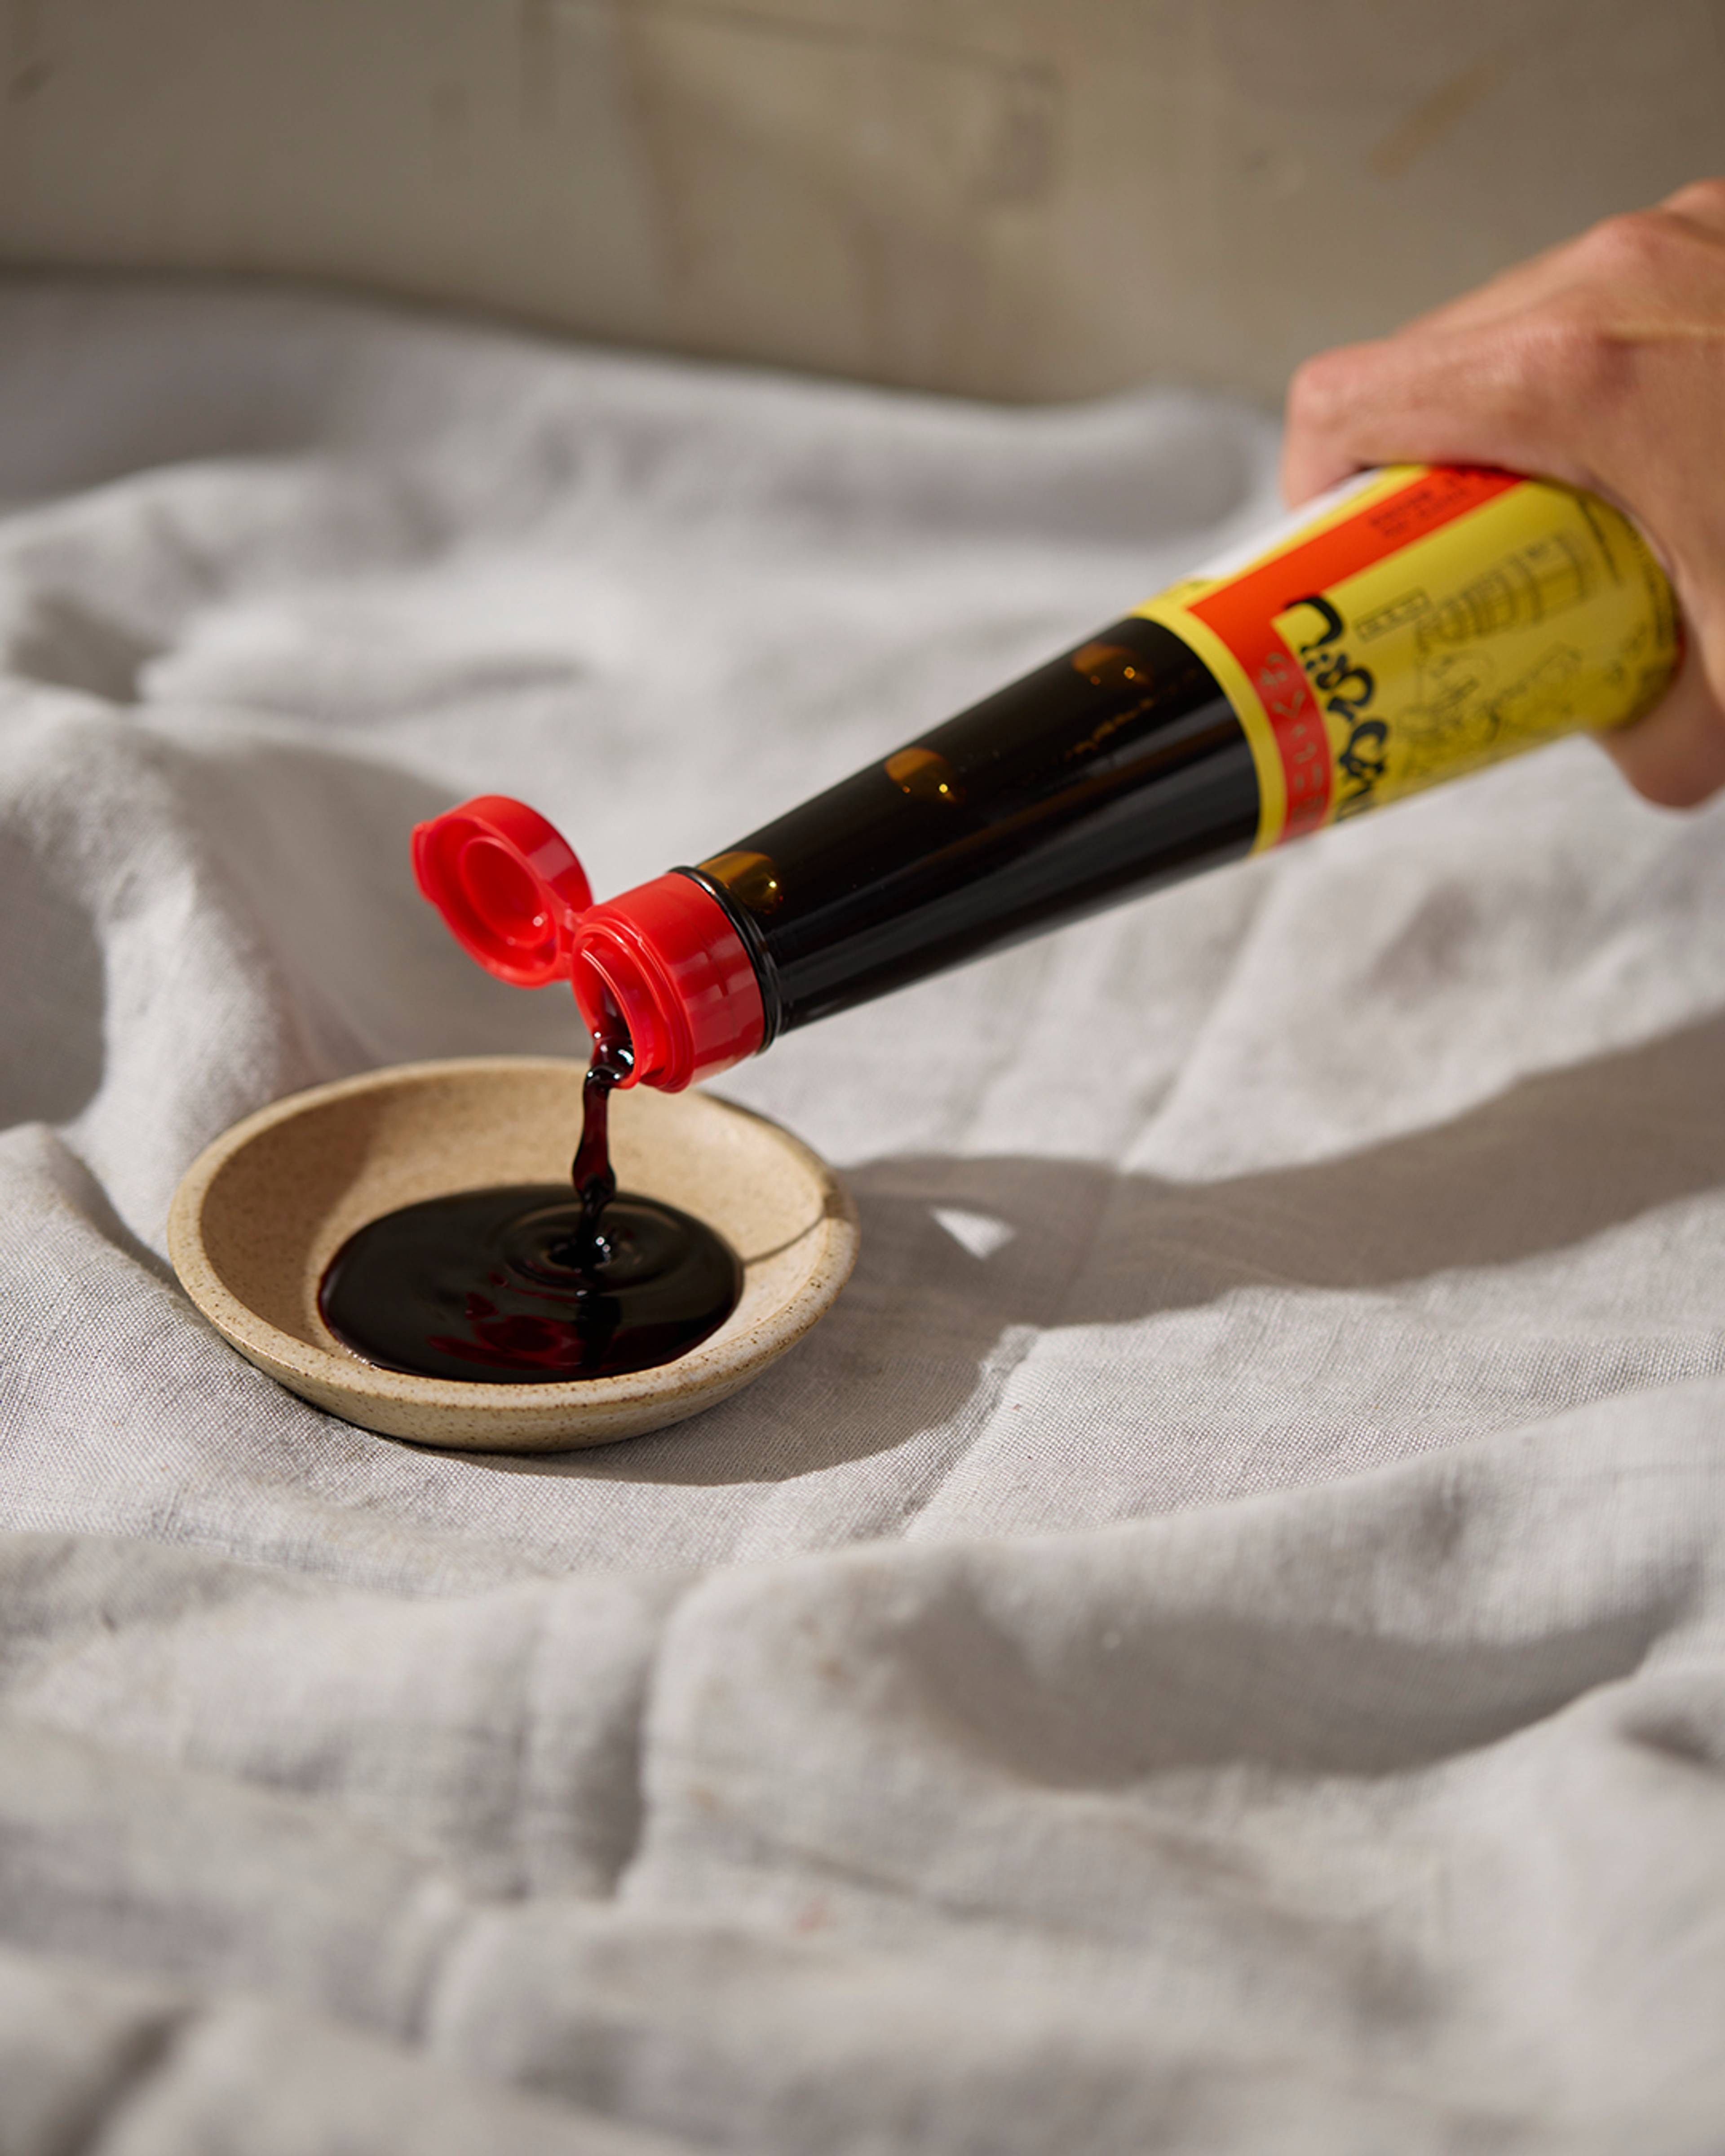 soy sauce being poured into a bowl